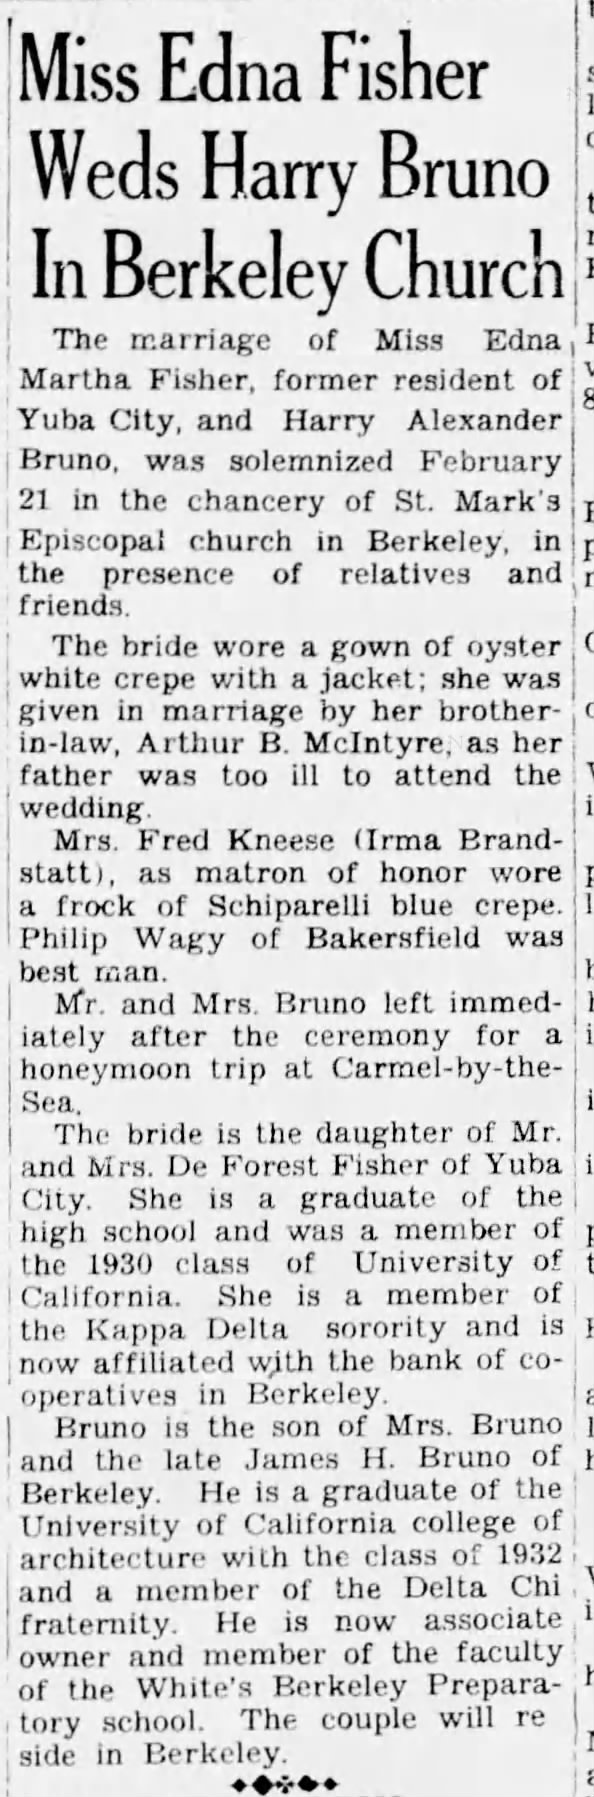 “Miss Edna Fisher and Harry Bruno Will Wed Feb. 21,” Feb. 13, 1943. p. 4.